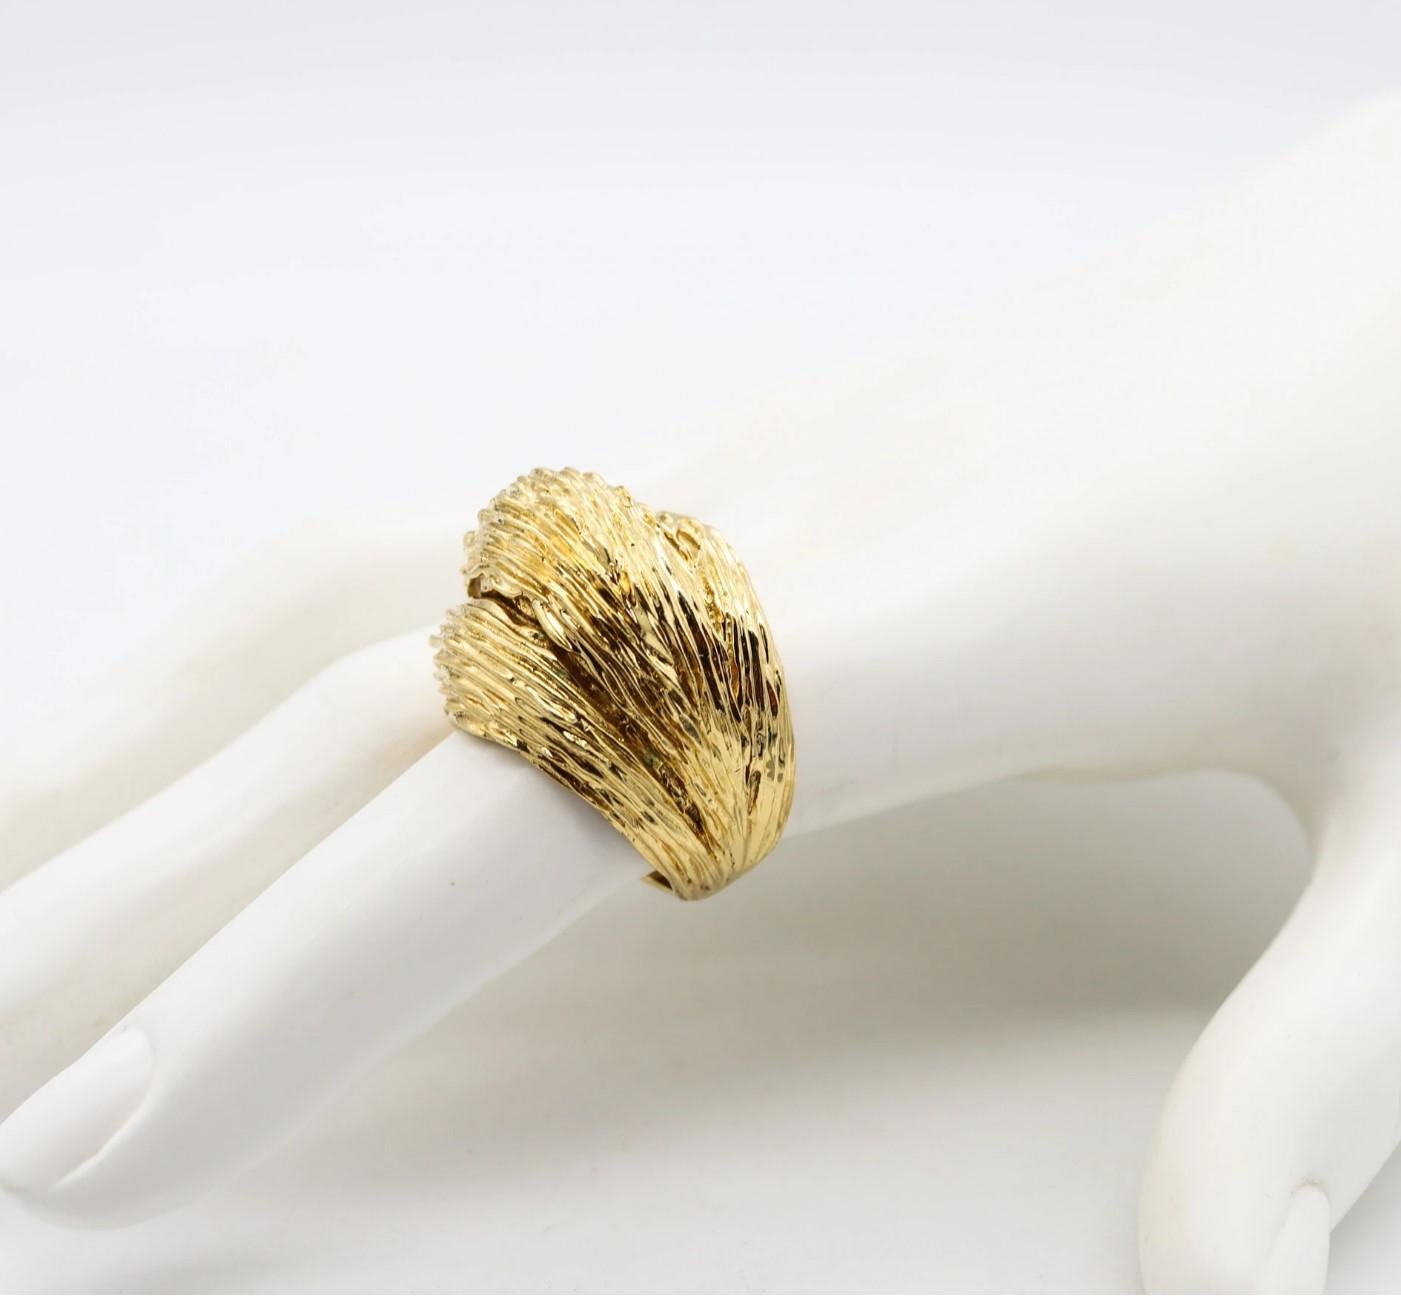 Van Cleef & Arpels 1970 Textured Bombe Cocktail Ring in Solid 18Kt Yellow Gold For Sale 2